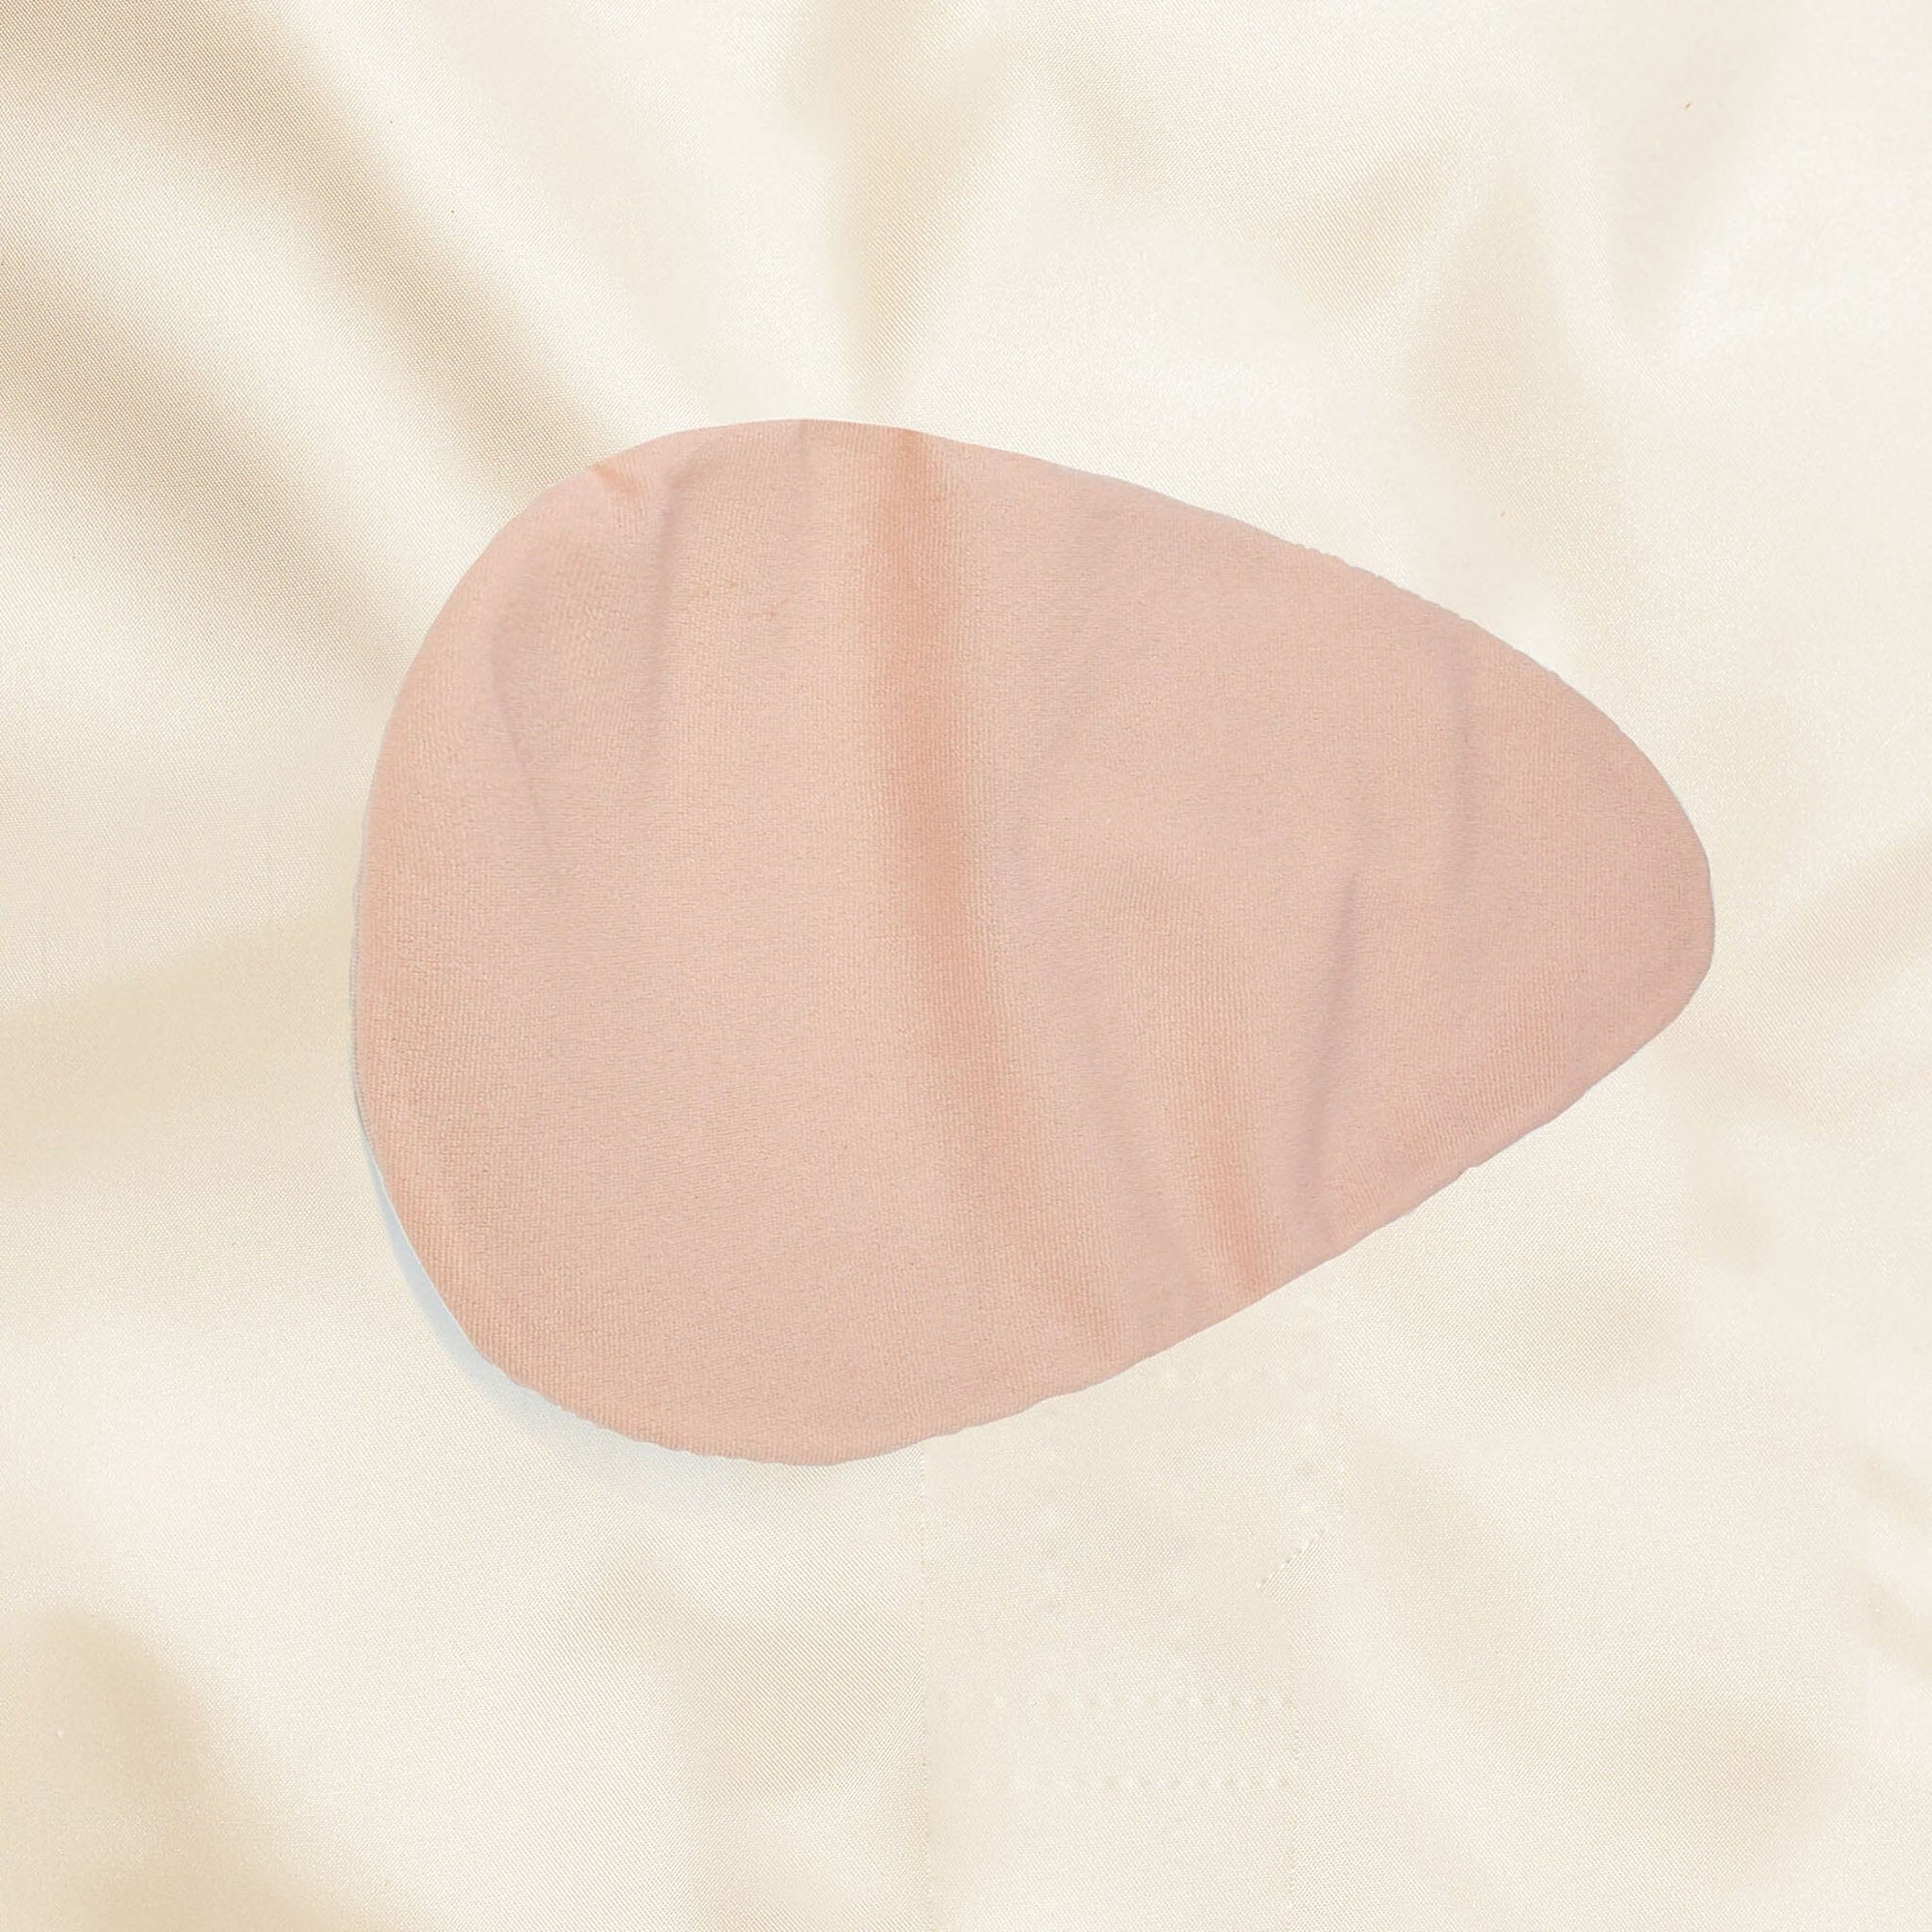 Teardrop Silicone Breast Form with Nipple